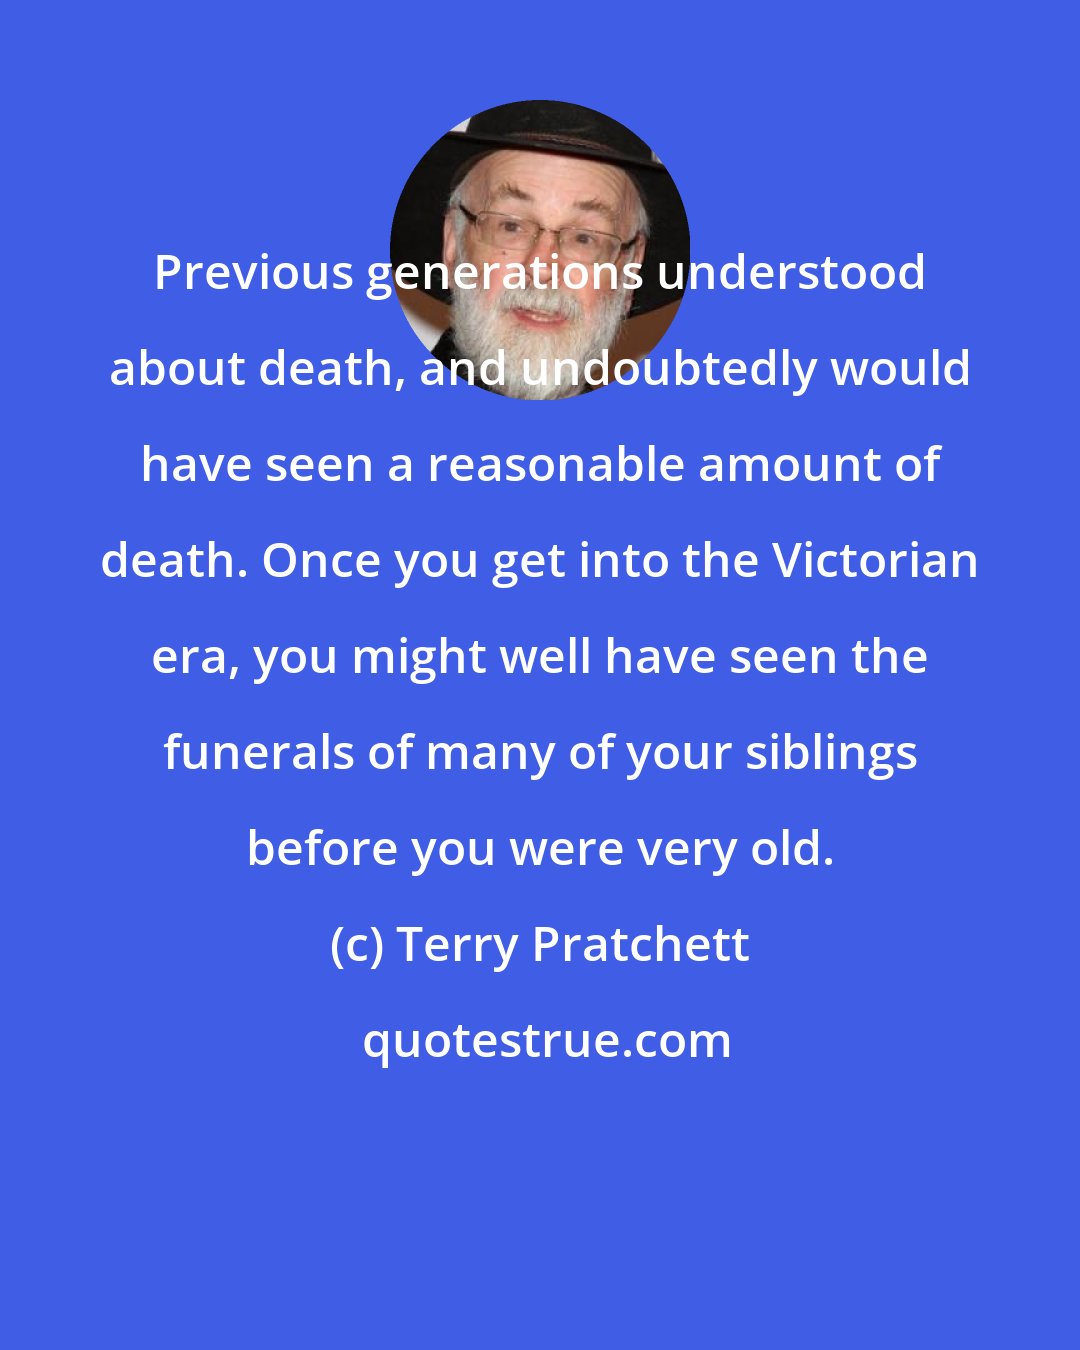 Terry Pratchett: Previous generations understood about death, and undoubtedly would have seen a reasonable amount of death. Once you get into the Victorian era, you might well have seen the funerals of many of your siblings before you were very old.